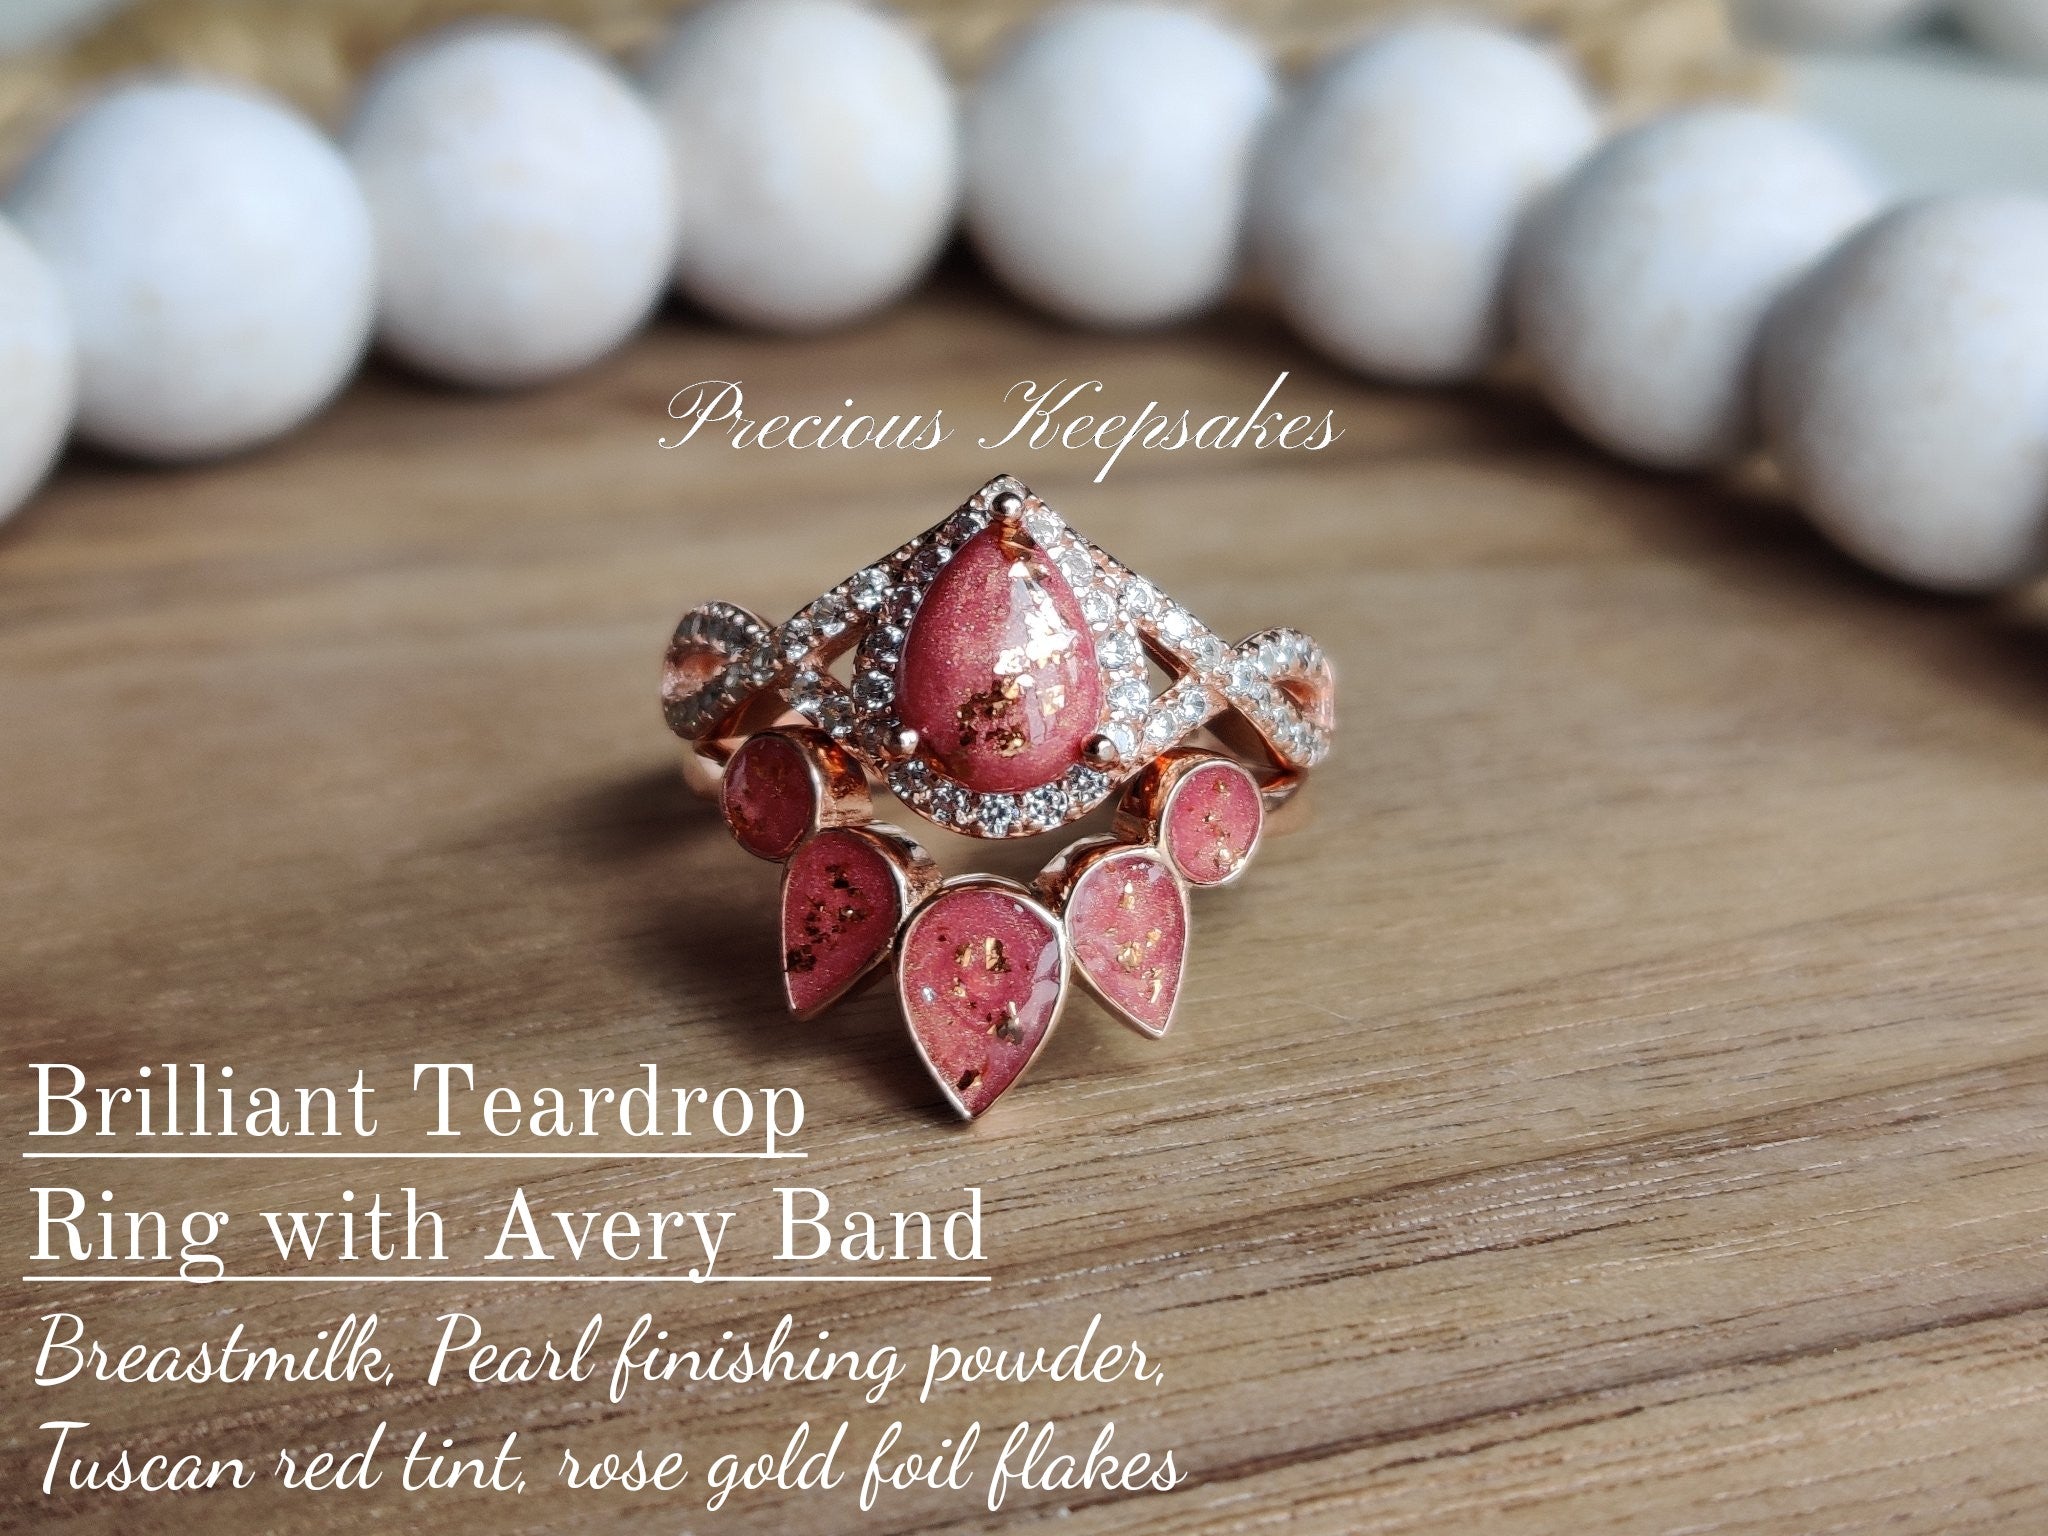 Brilliant Teardrop Ring with Avery Band